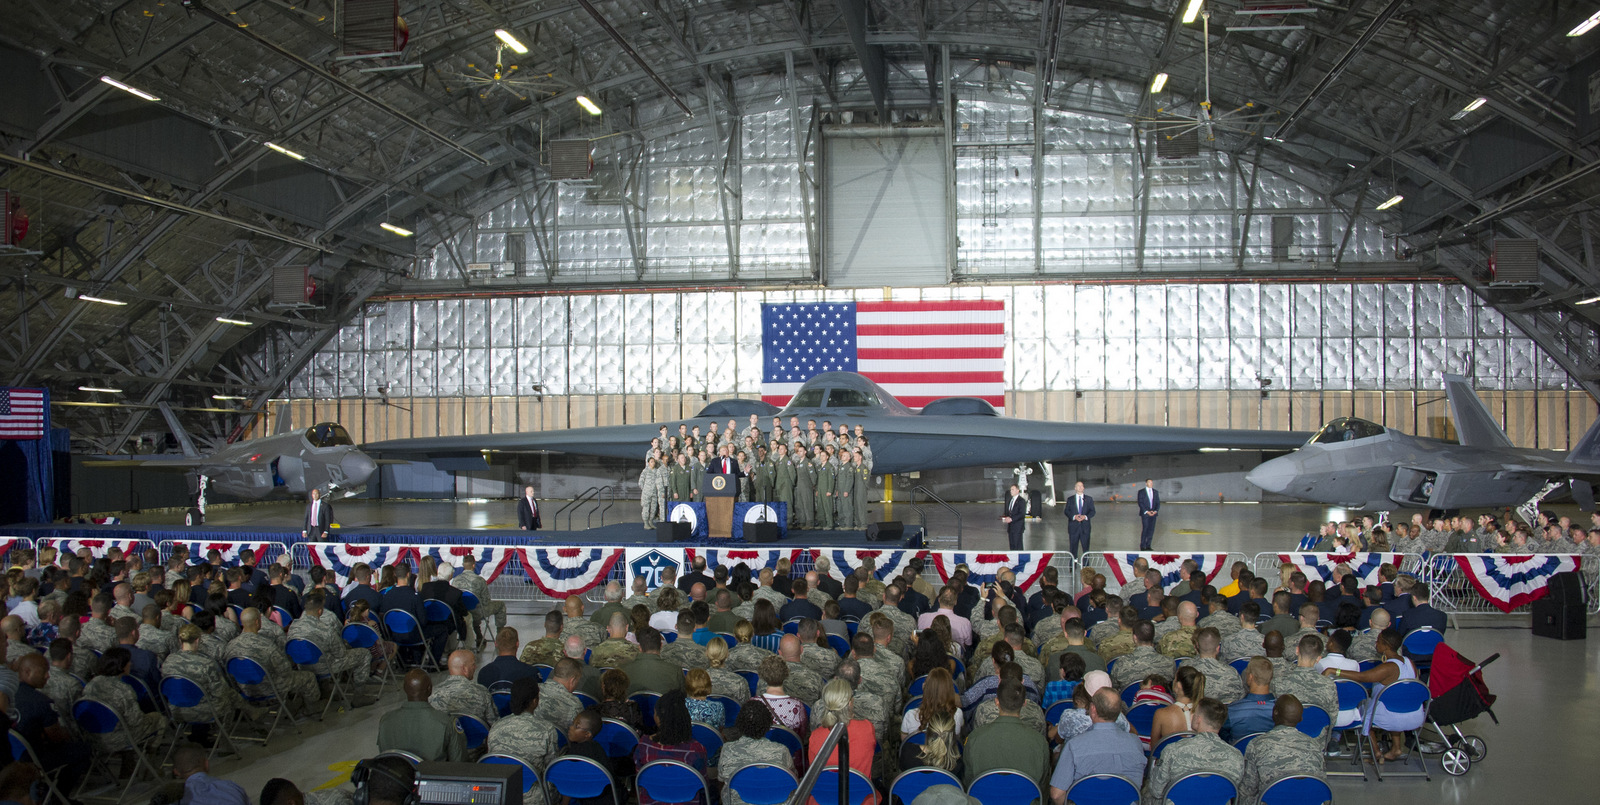 United States President Donald J. Trump delivers remarks to military personnel and families in a hanger at Joint Base Andrews in Maryland on, September 15, 2017.  He visited JBA to commemorate the 70th anniversary of the US Air Force.  In the background behind the group, from left is a F-35 Joint Strike Fighter, a B-2 Stealth Bomber and a F-22 fighter. (AP Photo)